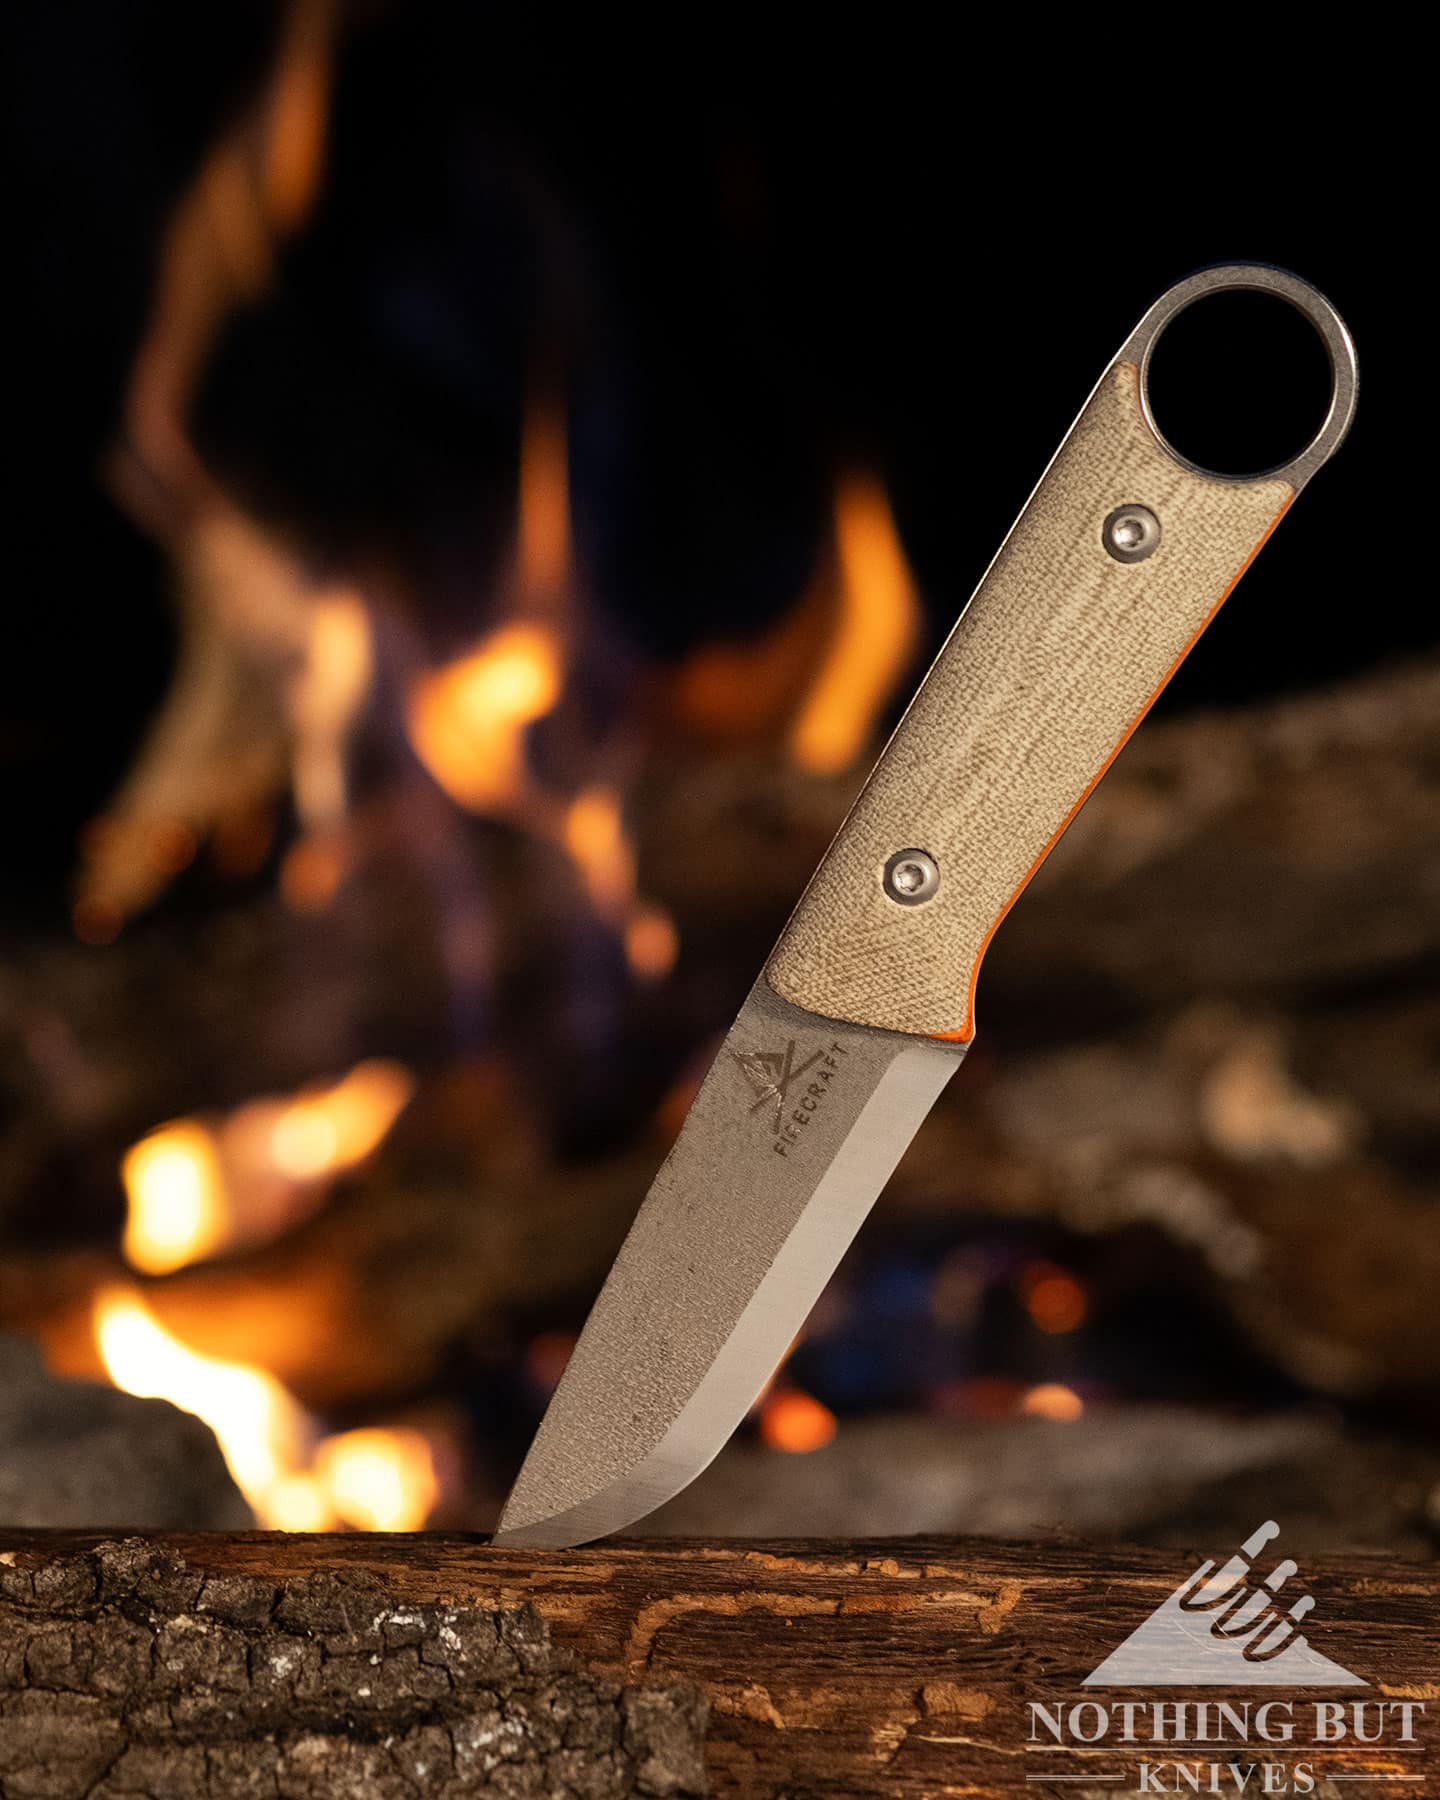 The White River Knives Firecraft Puukko is an excellent survival knife for throwing spark to start a campfire. 